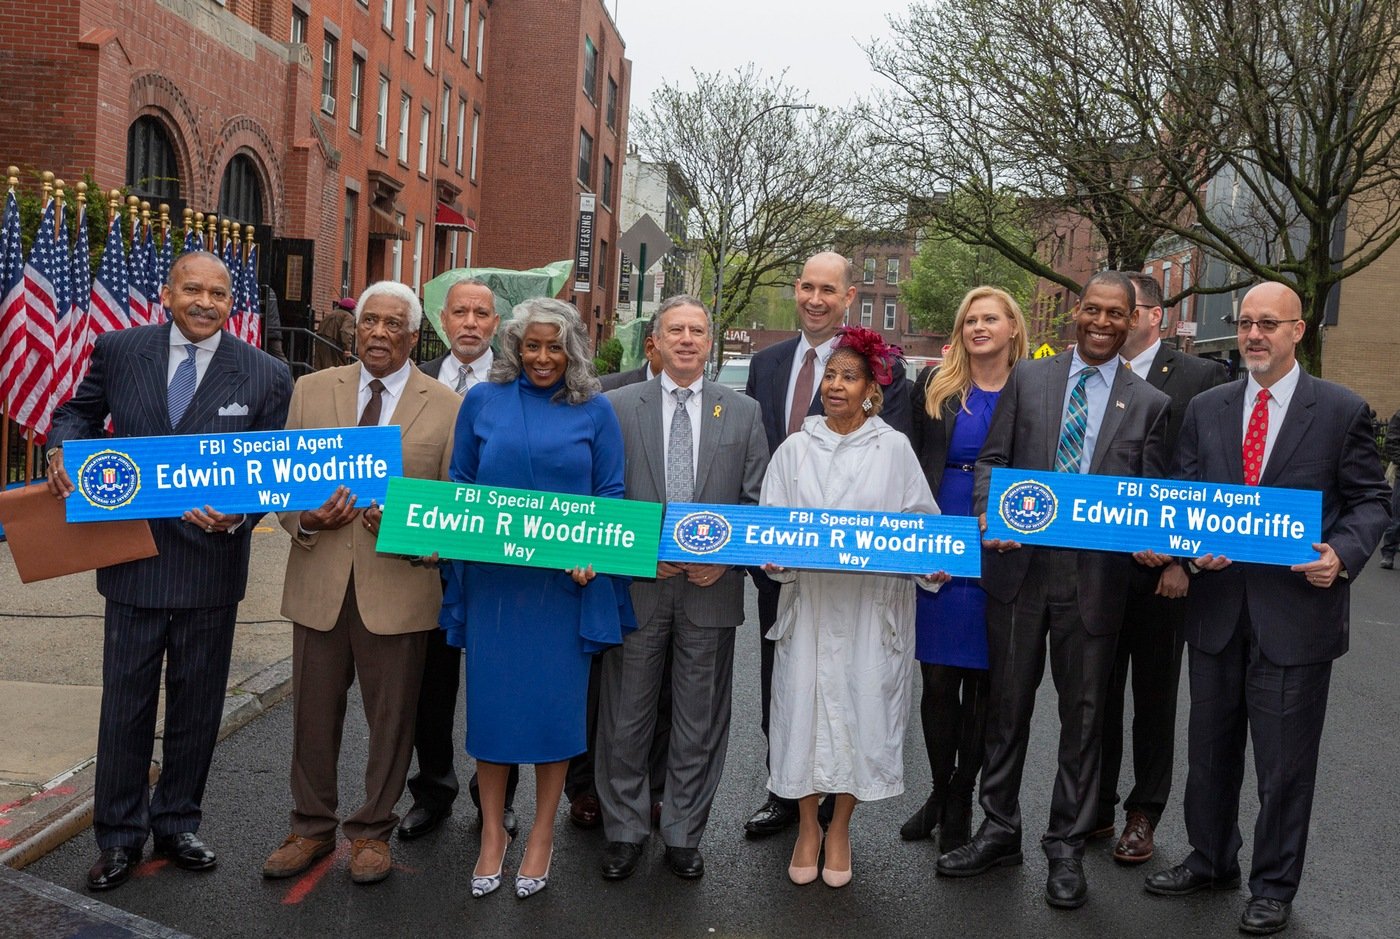 At an April 26, 2019 street renaming ceremony in New York, Woodriffe family members and FBI officials hold street signs bearing the name of Special Agent Edwin R. Woodriffe, who was the first African-American FBI agent killed in the line of duty.